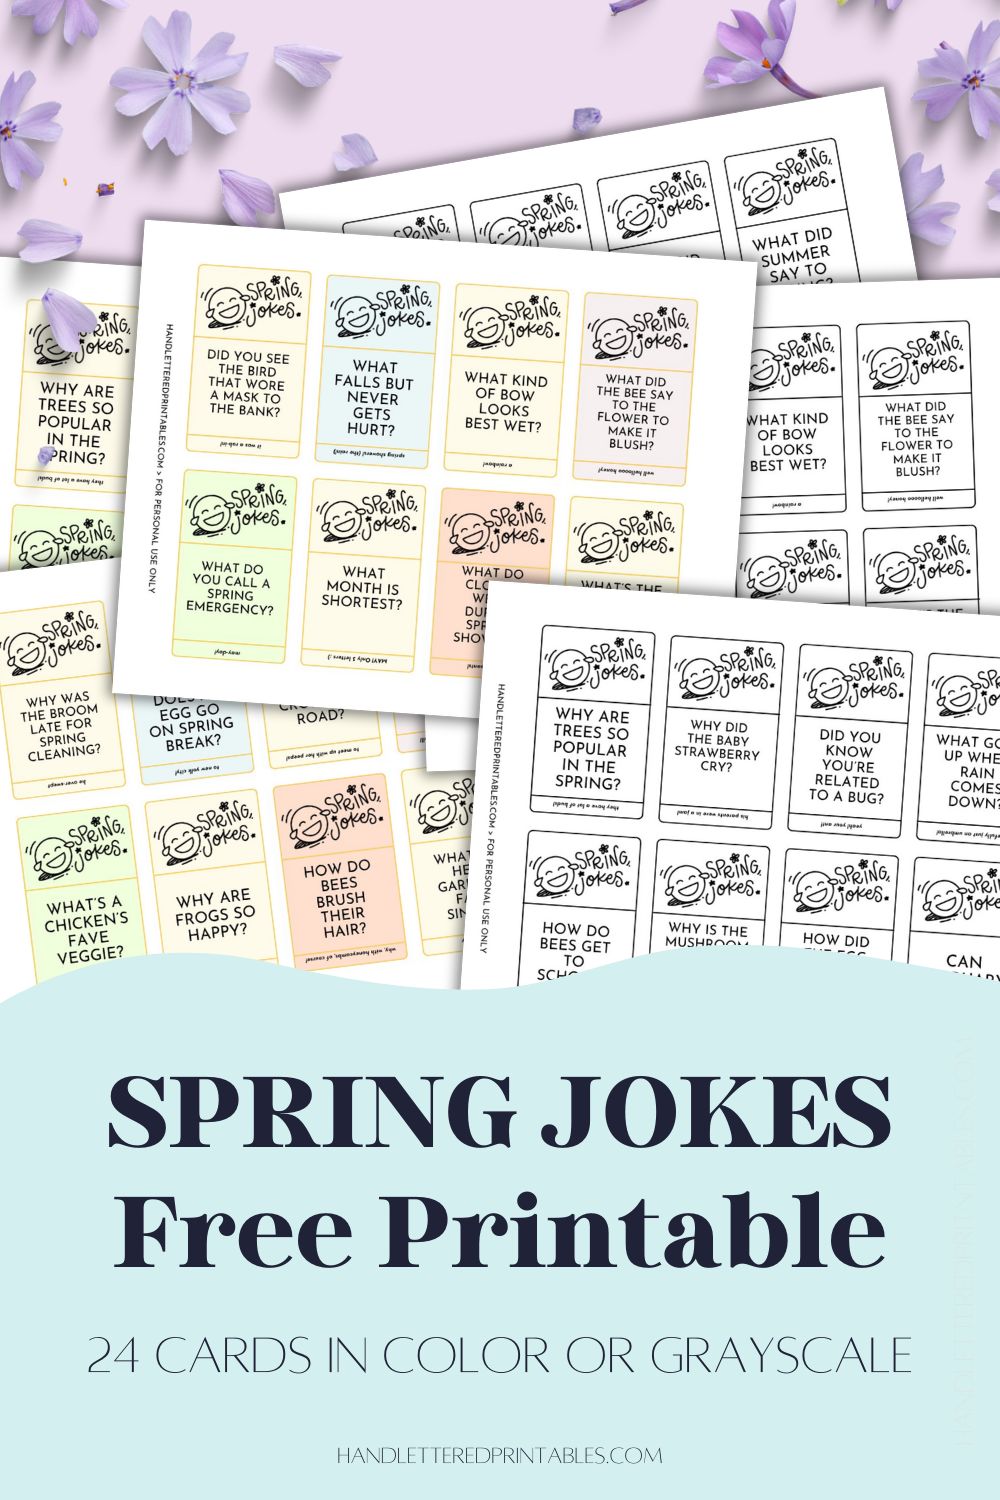 image of printed joke cards 6 to a page on purple backdrop with purple flowers scattered. text over reads: spring jokes free printable 24 cards in color or grayscale